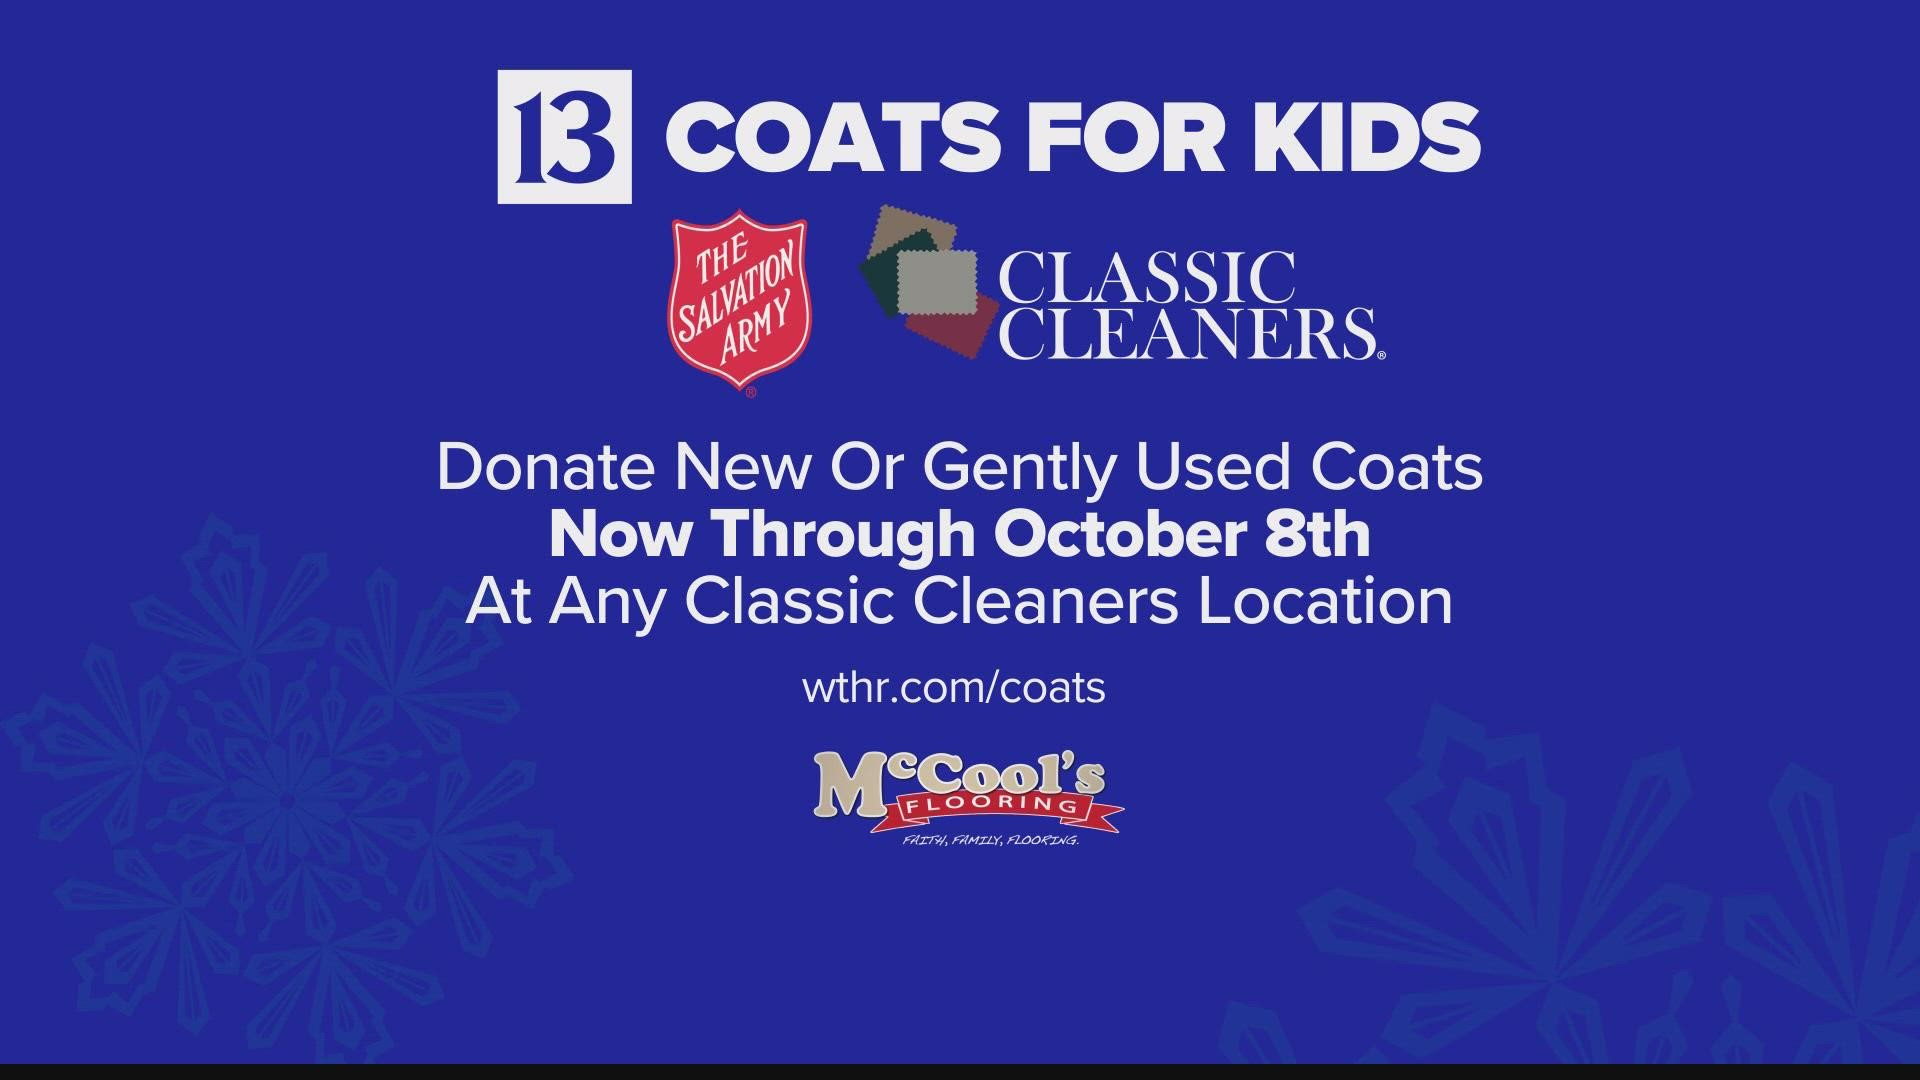 Volunteers will be stationed on all sides of the stadium from 11 a.m. until 1 p.m. to collect new and gently used coats from Colts fans.